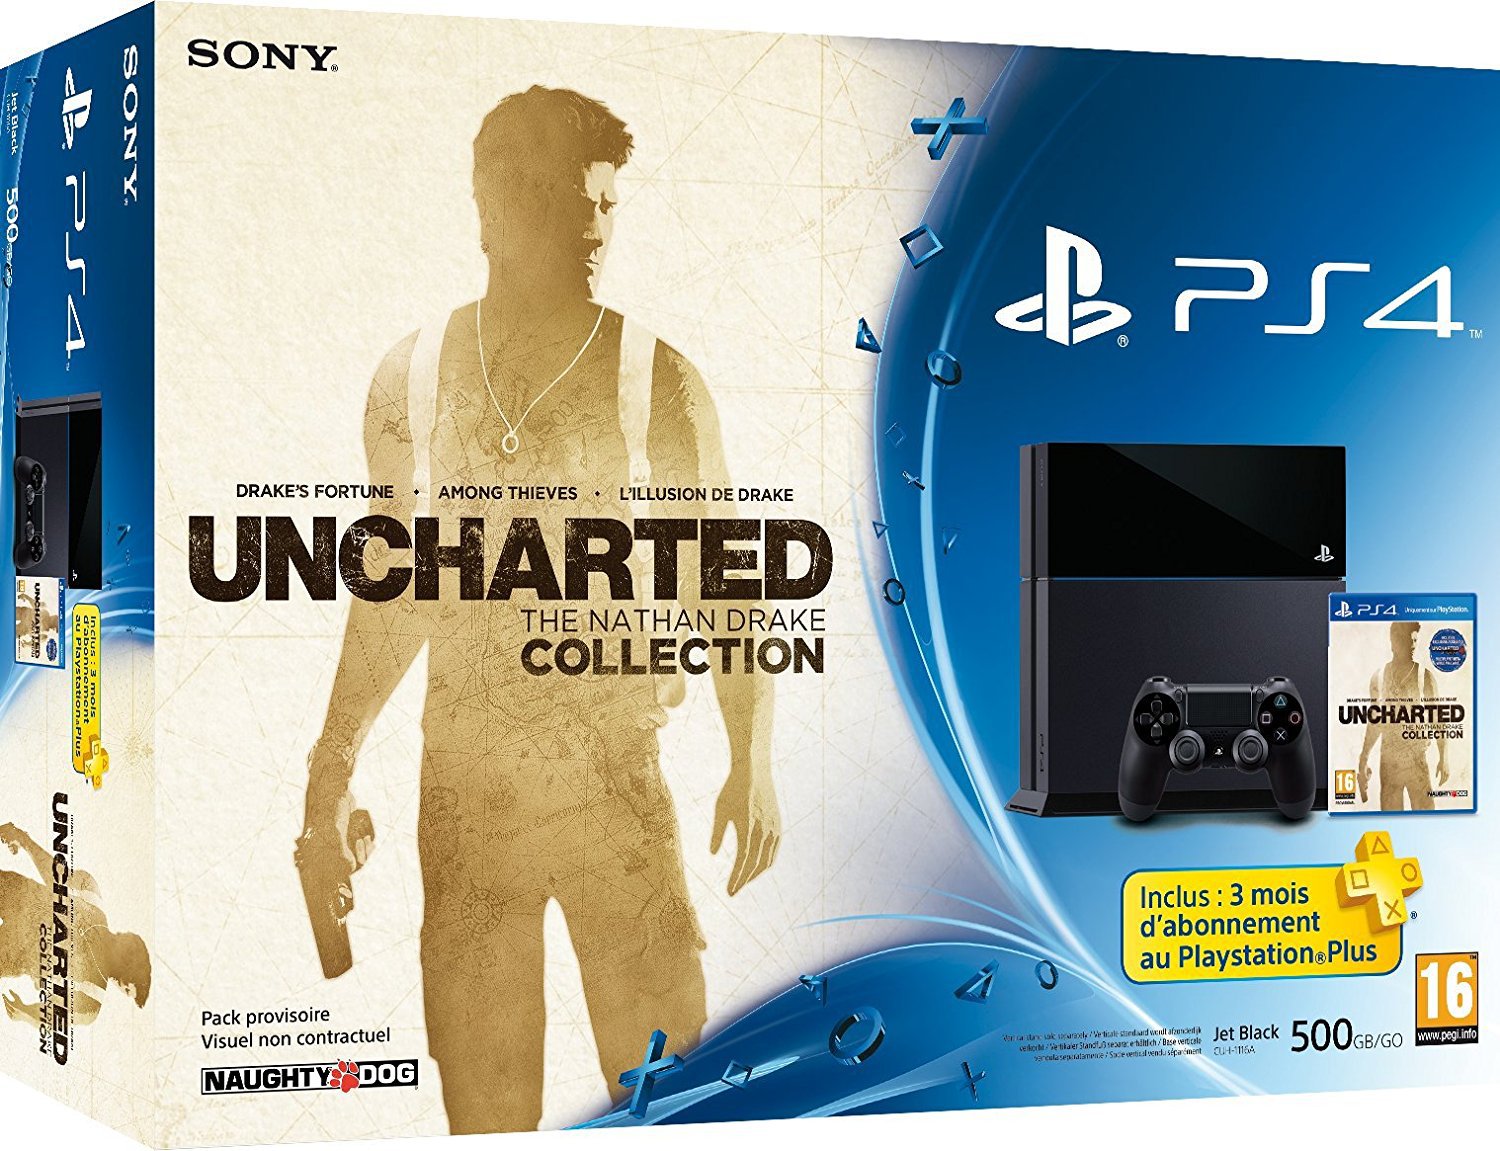 Uncharted collection купить. Анчартед коллекция ps4. Uncharted 1 ps4.